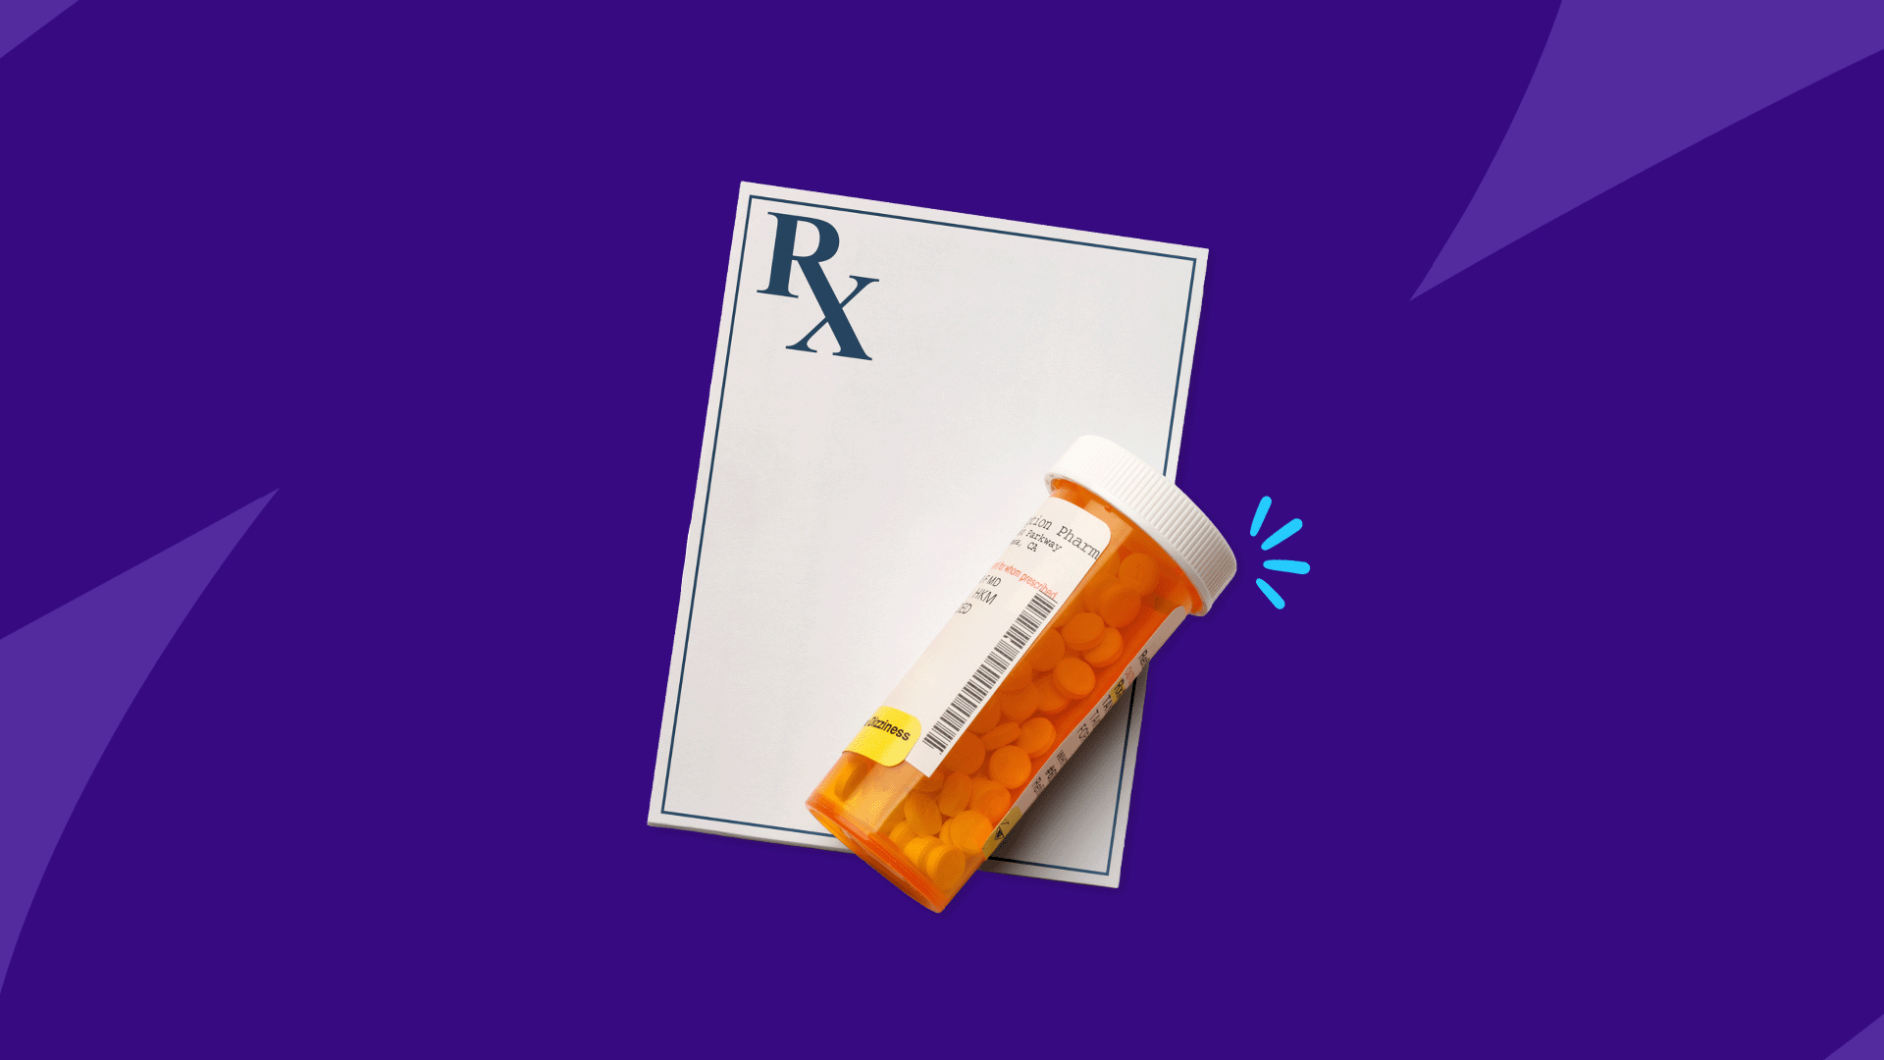 Rx pill bottle and prescription pad: Rybelsus for weight loss